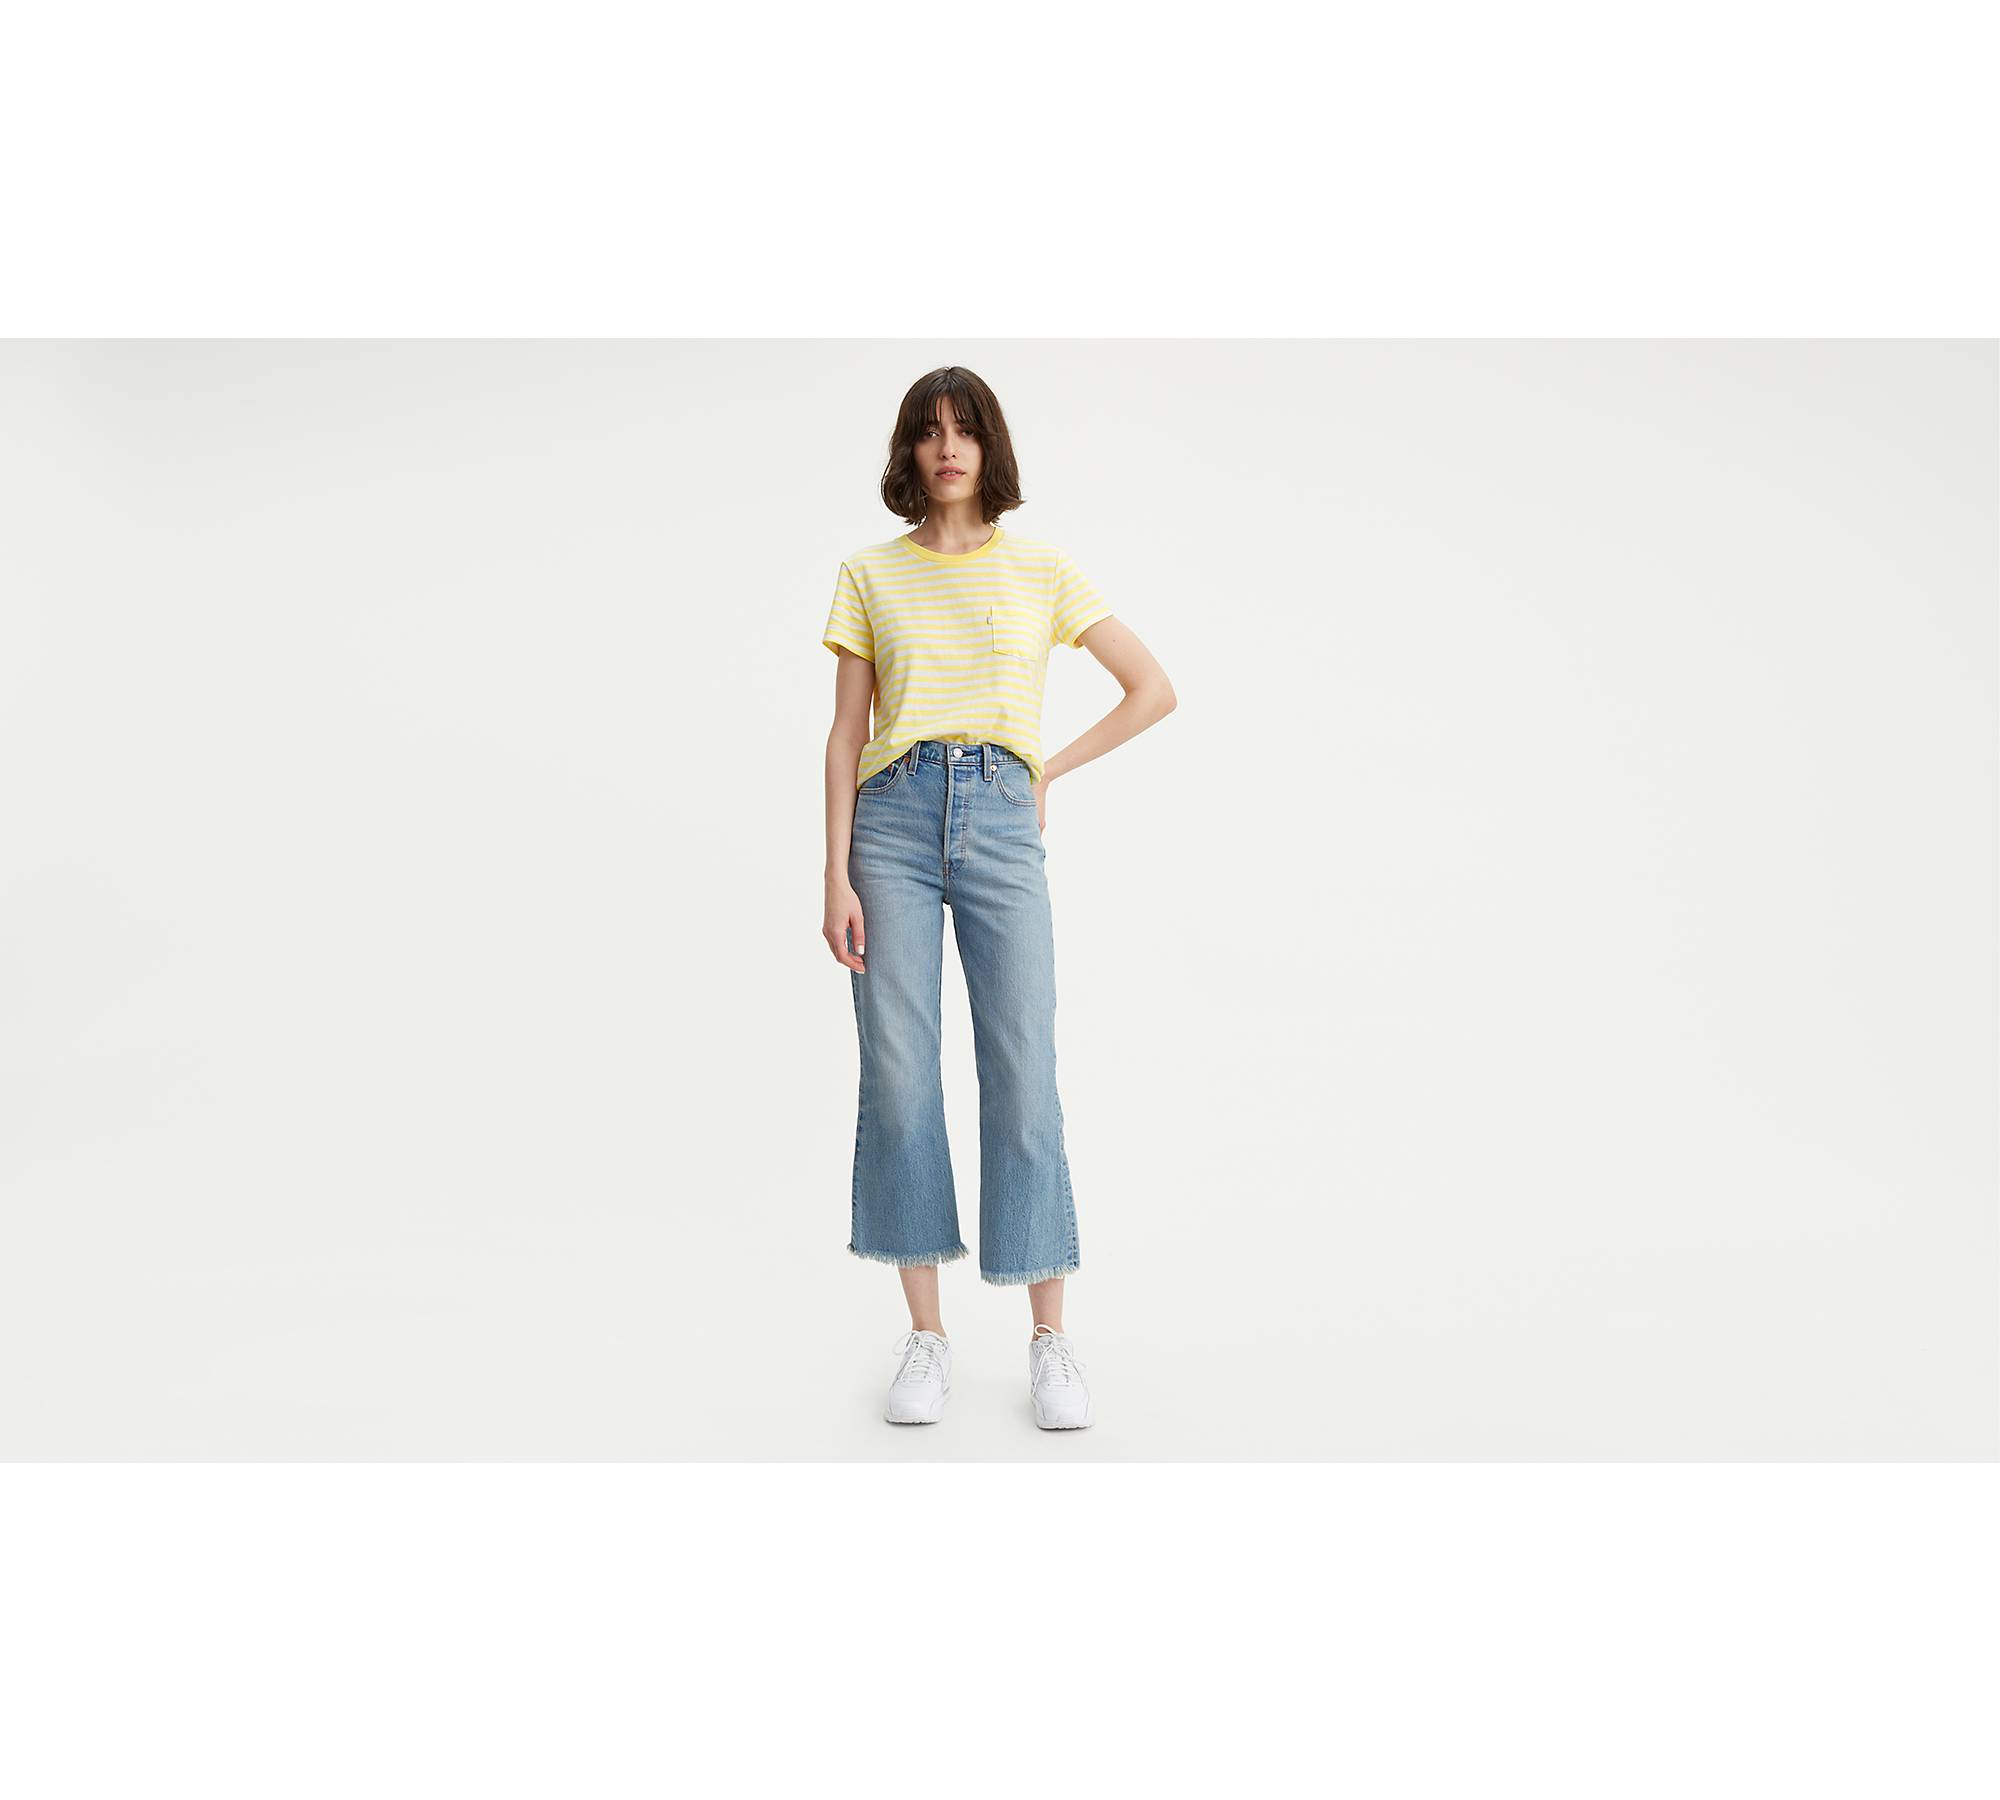 Ribcage Cropped Flare Women's Jeans - Light Wash